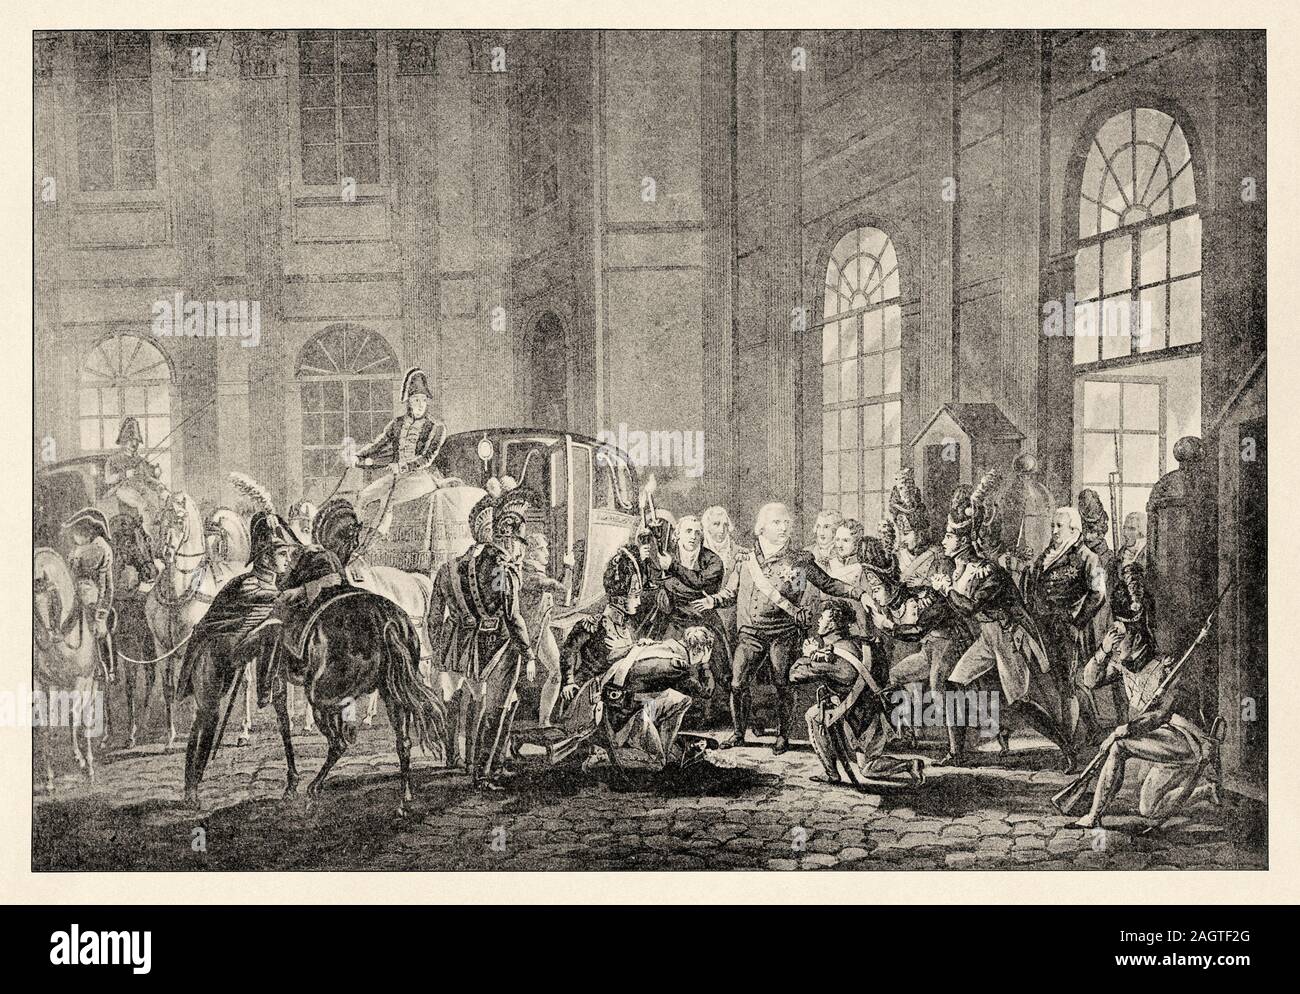 The departure of King Louis XVIII on March 2, 1815. History of France, old engraved illustration image from the book Histoire contemporaine par l'imag Stock Photo